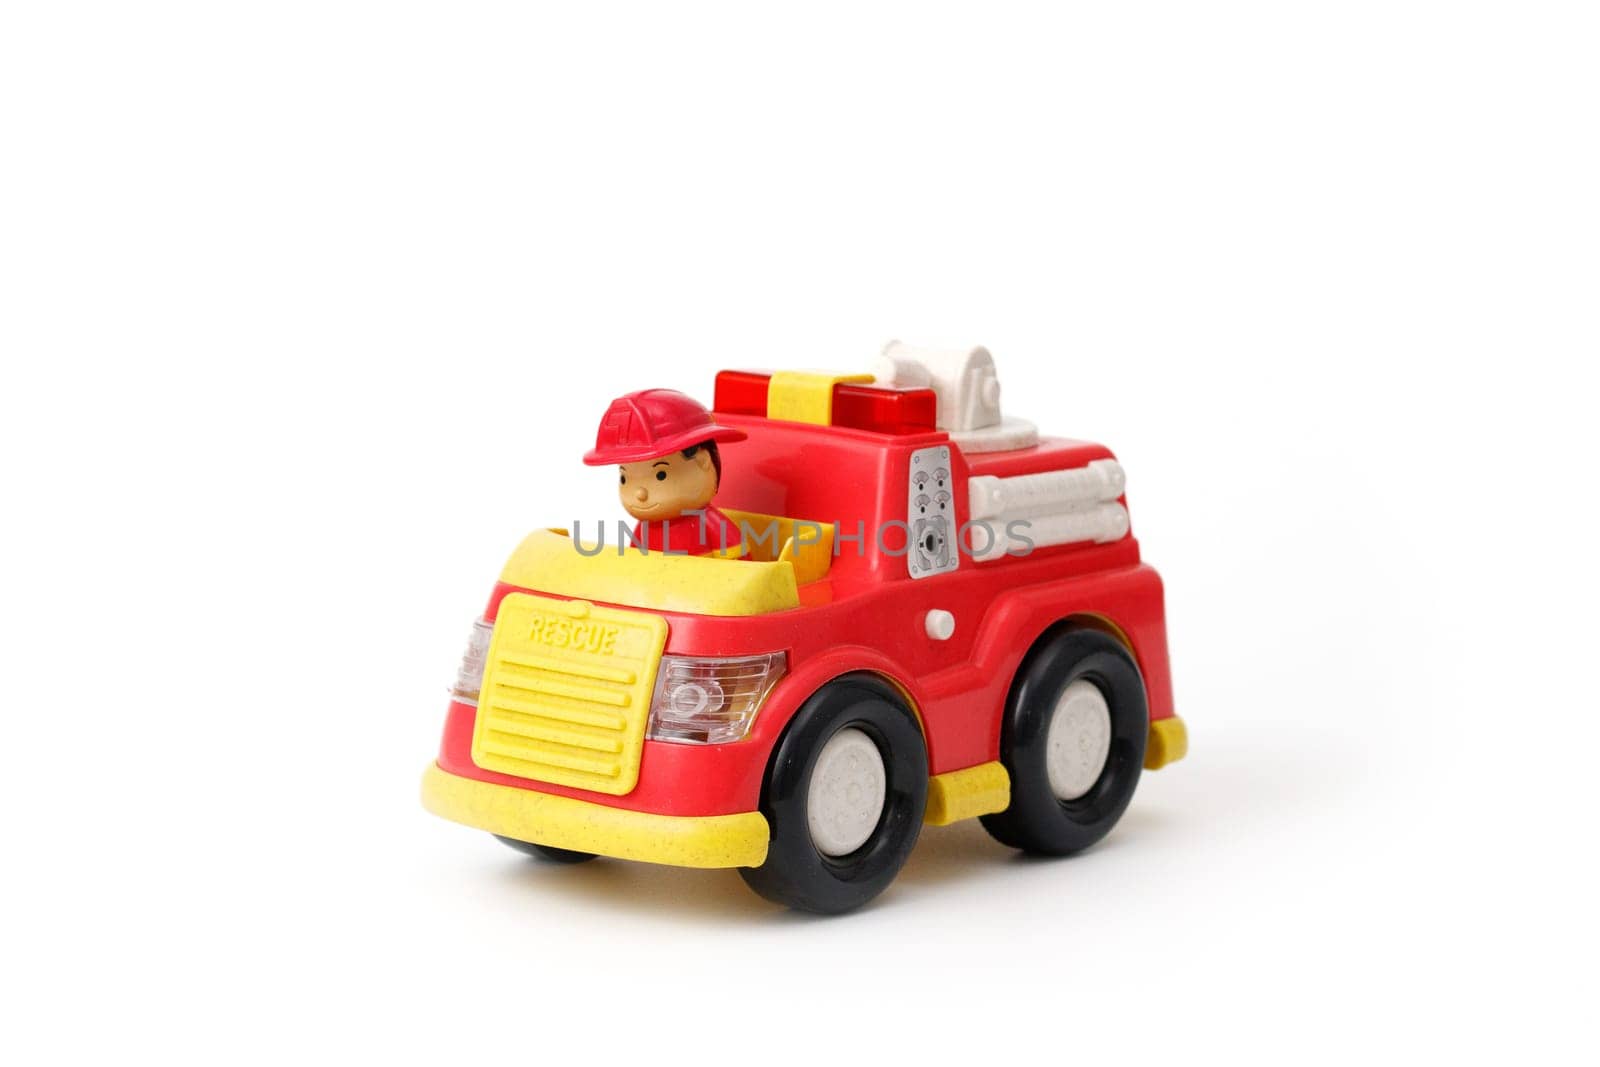 Children's toy red fire truck with driver in the cabin, isolated on whire background.